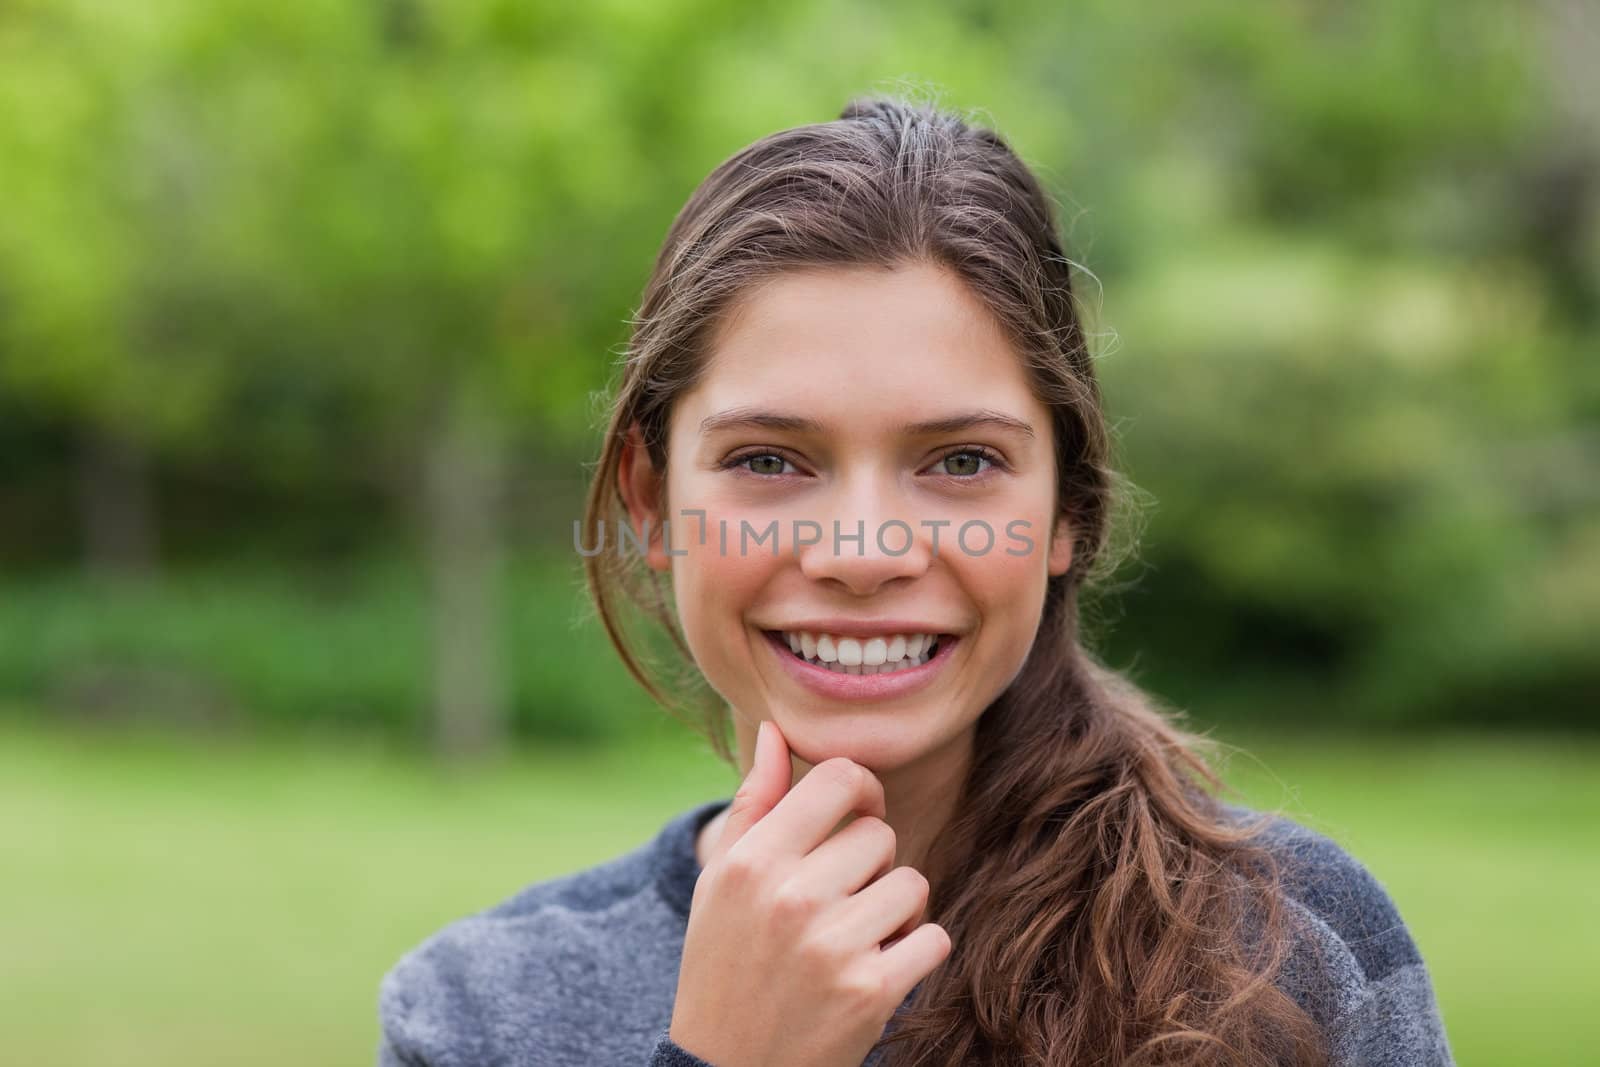 Smiling girl placing her hand on her chin while standing upright by Wavebreakmedia